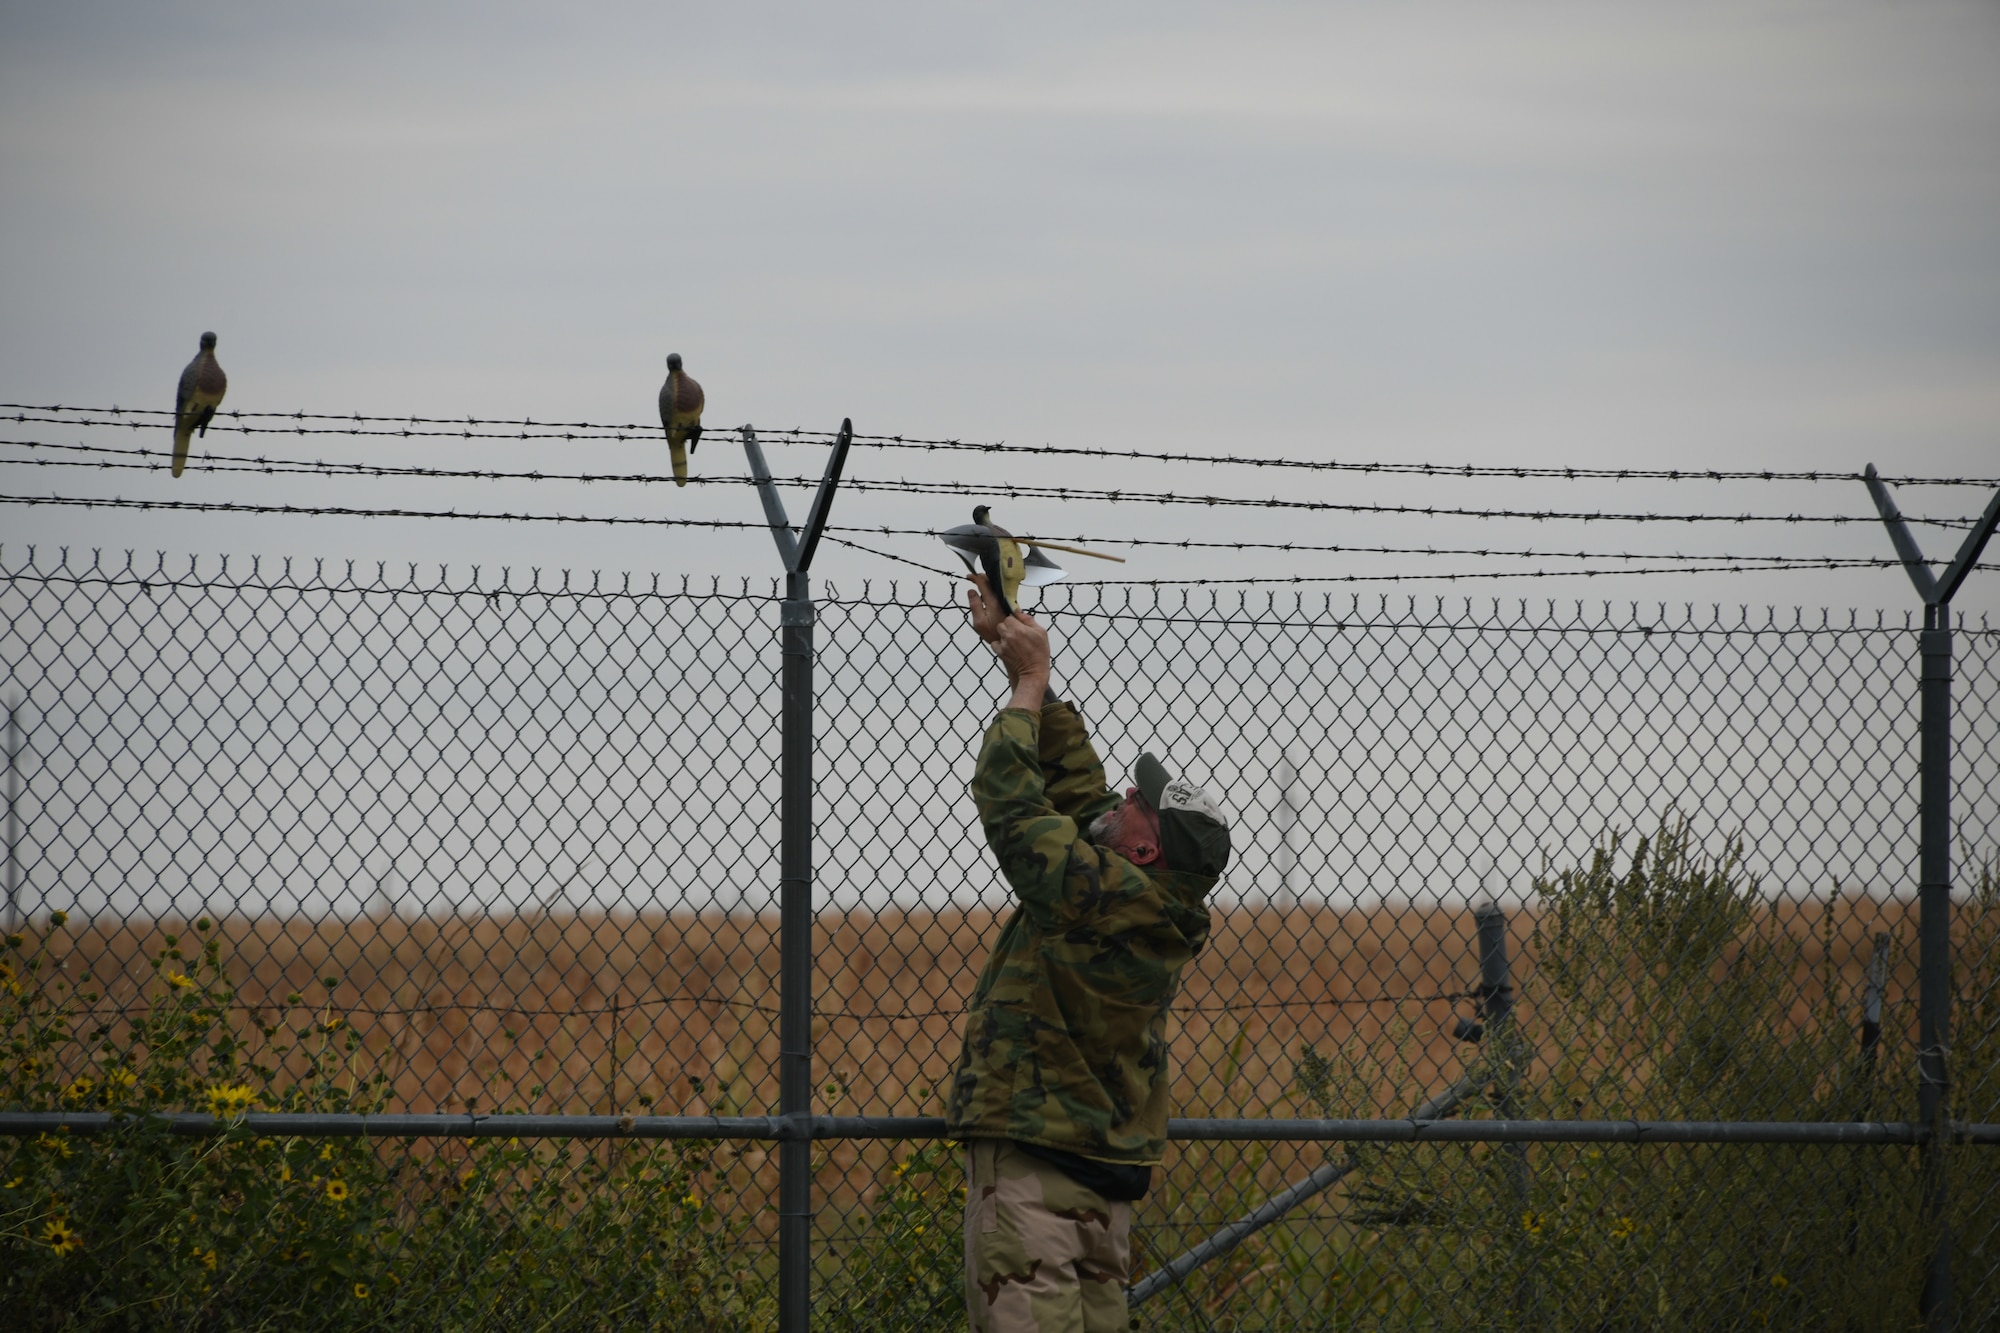 Greg Goskey places a decoy on a fence during a dove hunt at Altus Air Force Base, Oklahoma, Oct. 8, 2022. Decoys are life-like models of game used to lure animals toward a hunter's position. (U.S. Air Force photo by Airman 1st Class Miyah Gray)